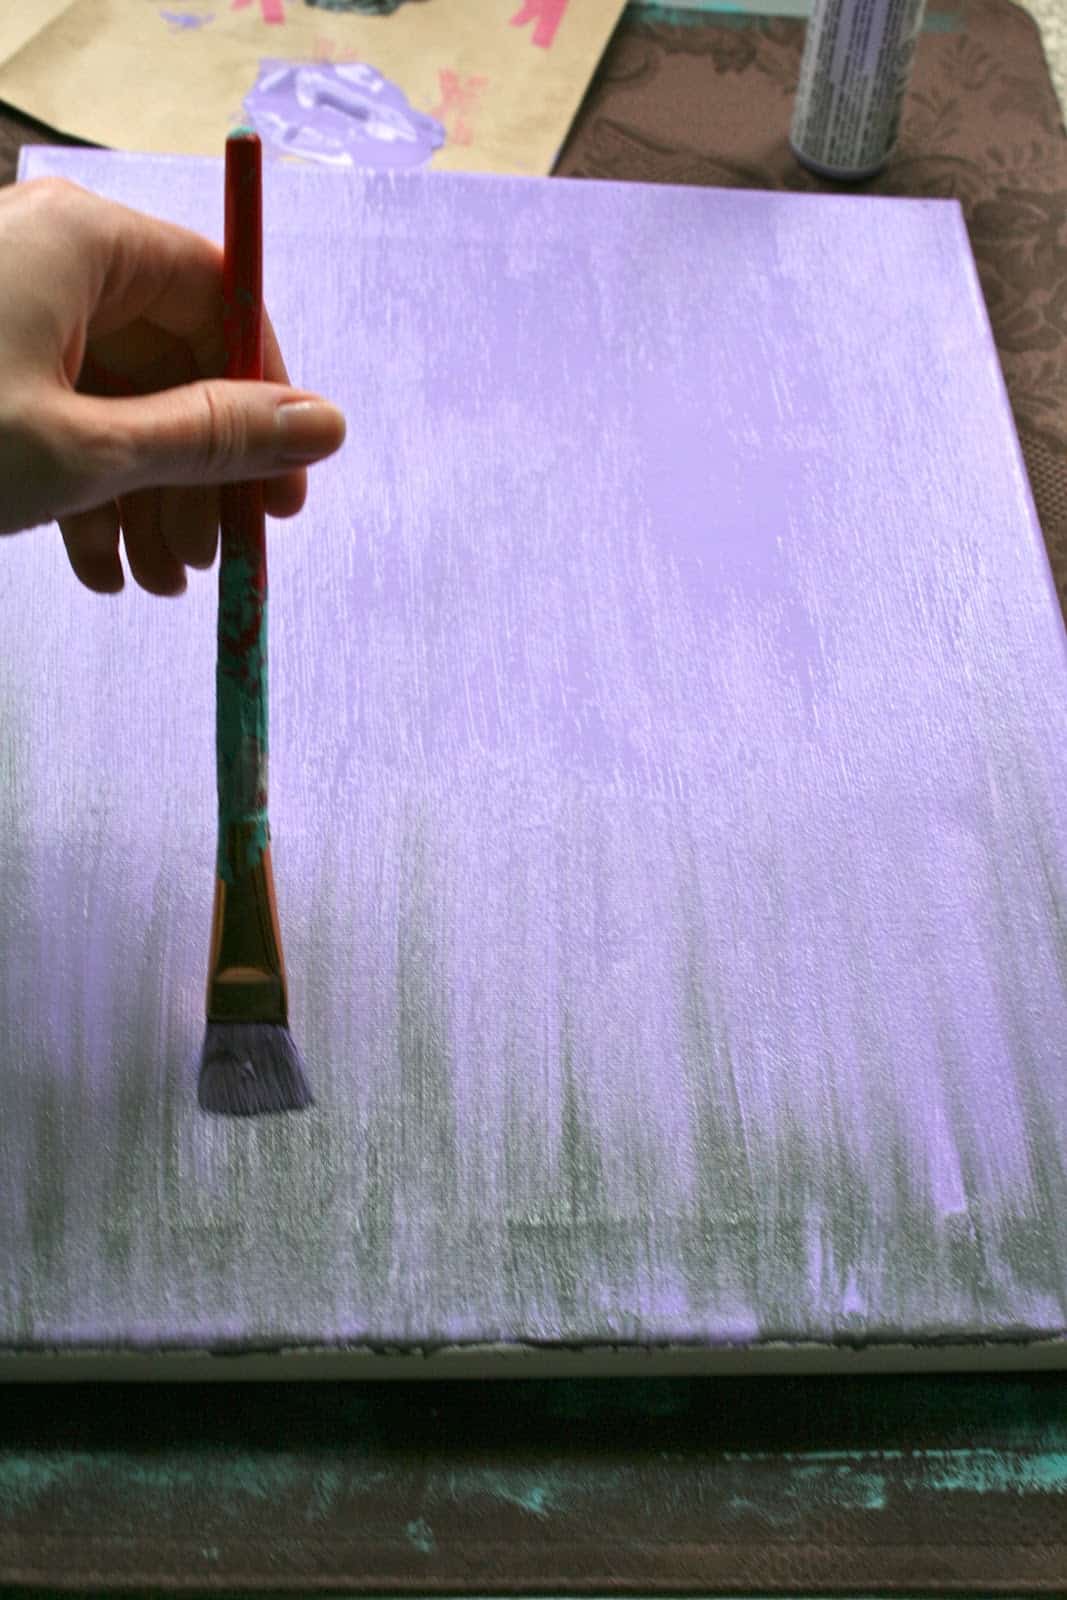 10. LEARN DIFFERENT TECHNIQUES OF APPLYING A COLORED GROUND